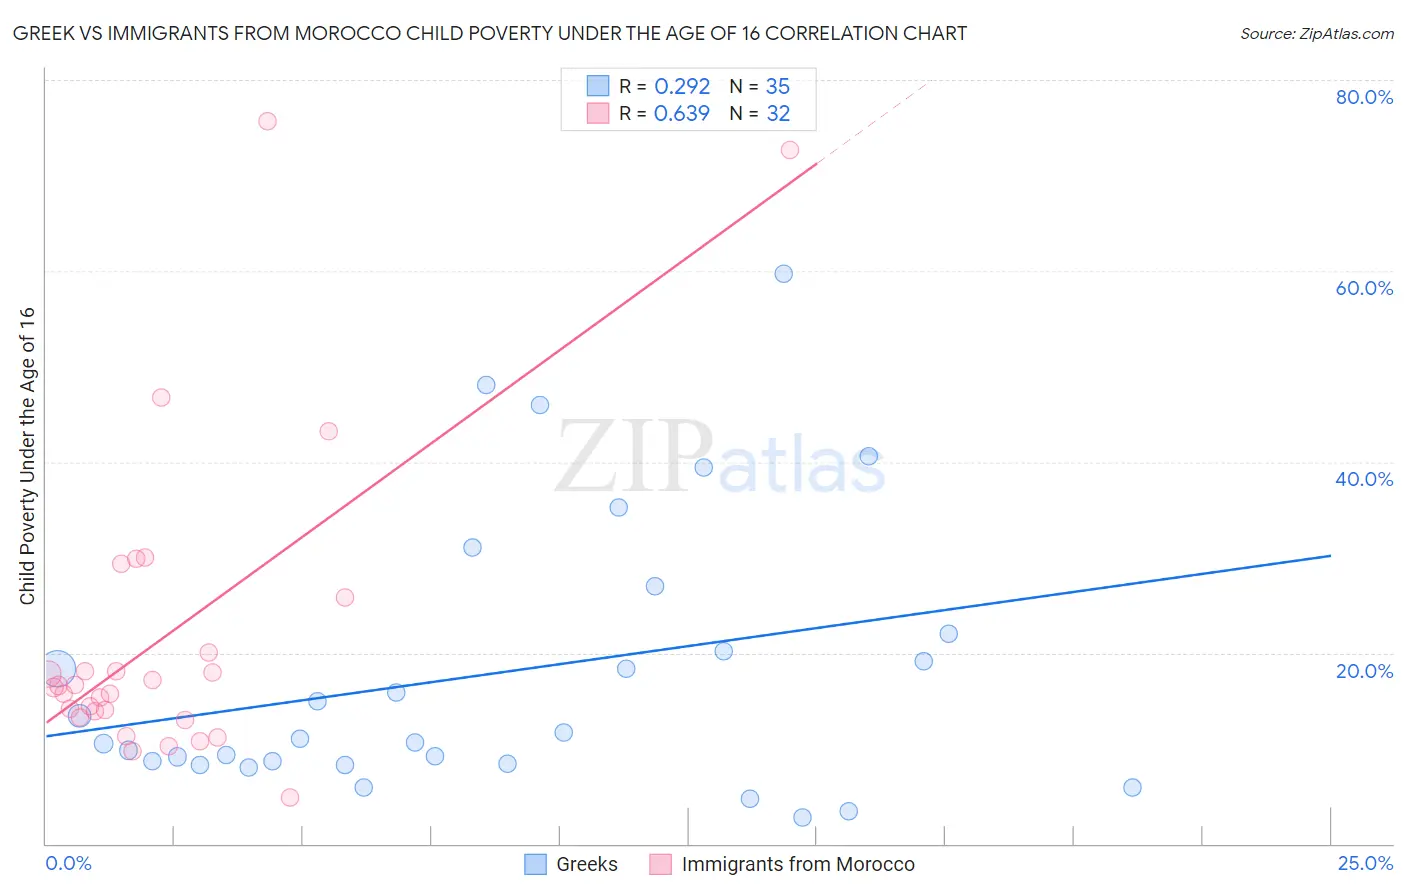 Greek vs Immigrants from Morocco Child Poverty Under the Age of 16